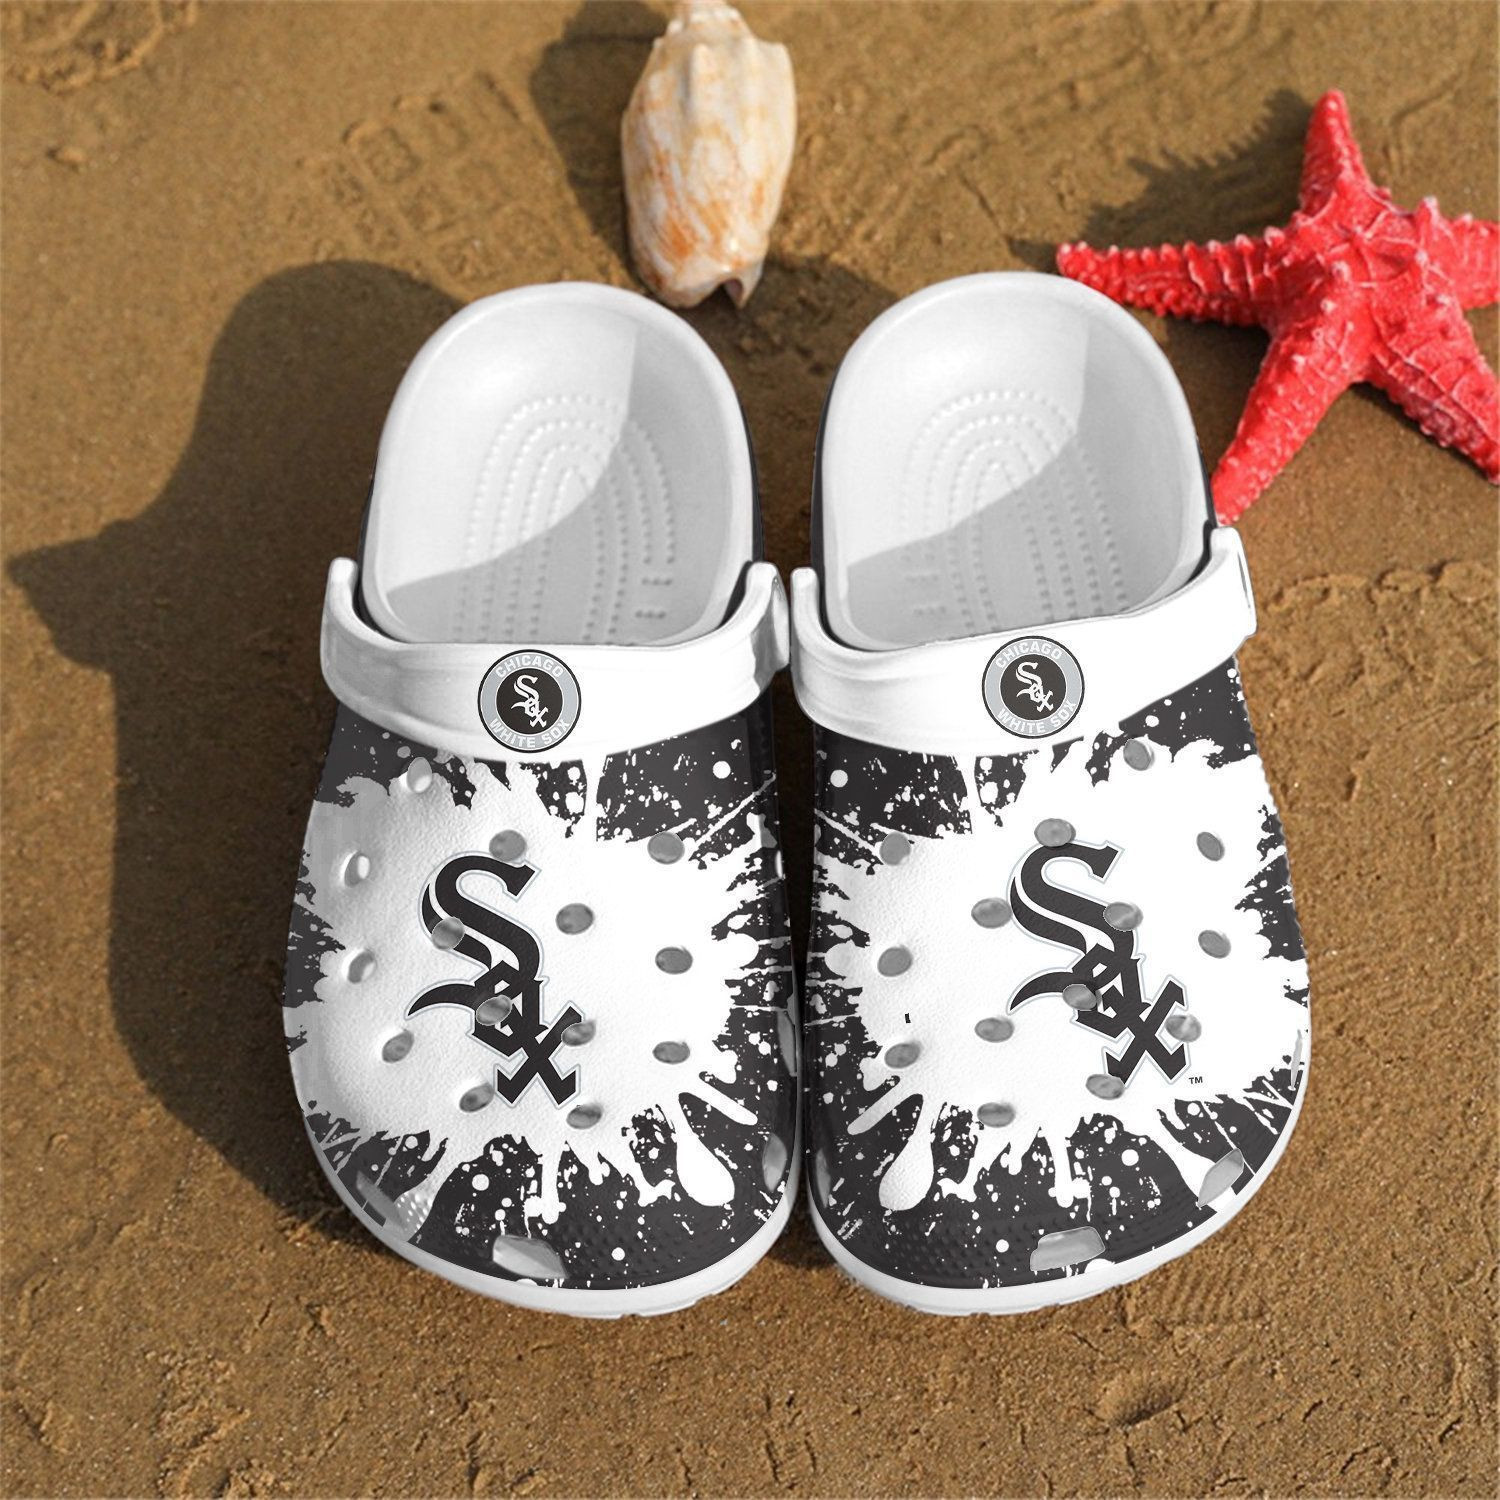 Chicago White Sox Mlb Gift For Fan Crocs Clog Shoescrocband Clogs Comfy